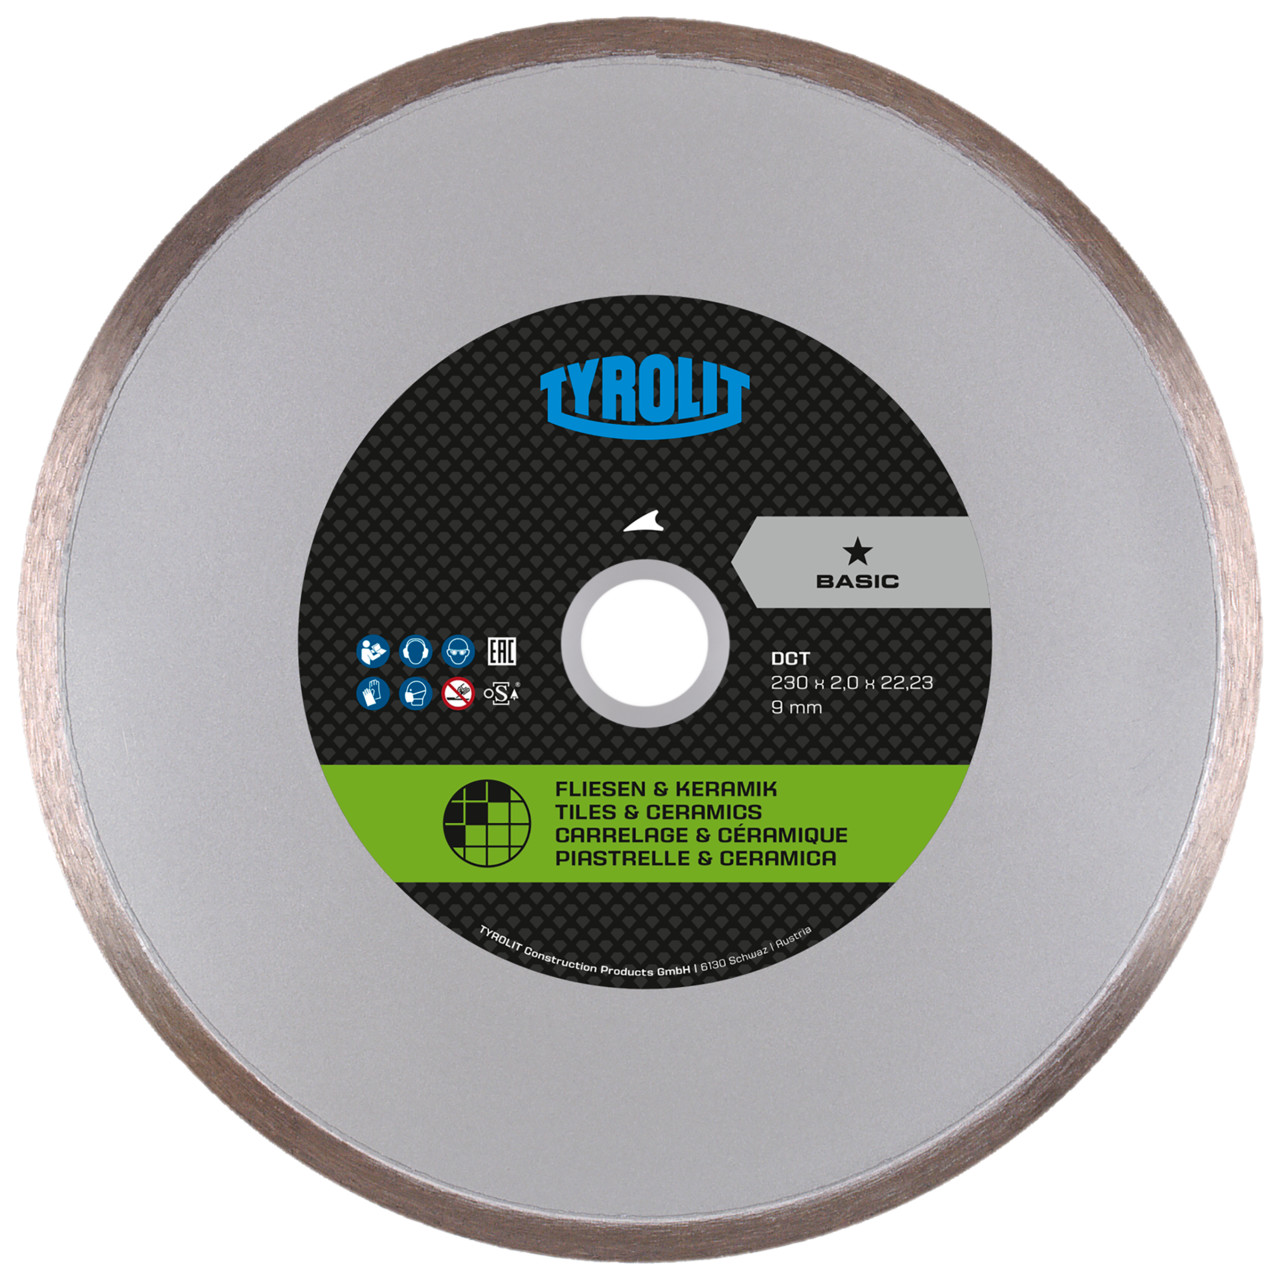 Tyrolit Dry-cutting saw blades DxDxH 115x1.6x22.23 DCT, shape: 1A1R (cutting disc with continuous cutting wheel), Art. 475978